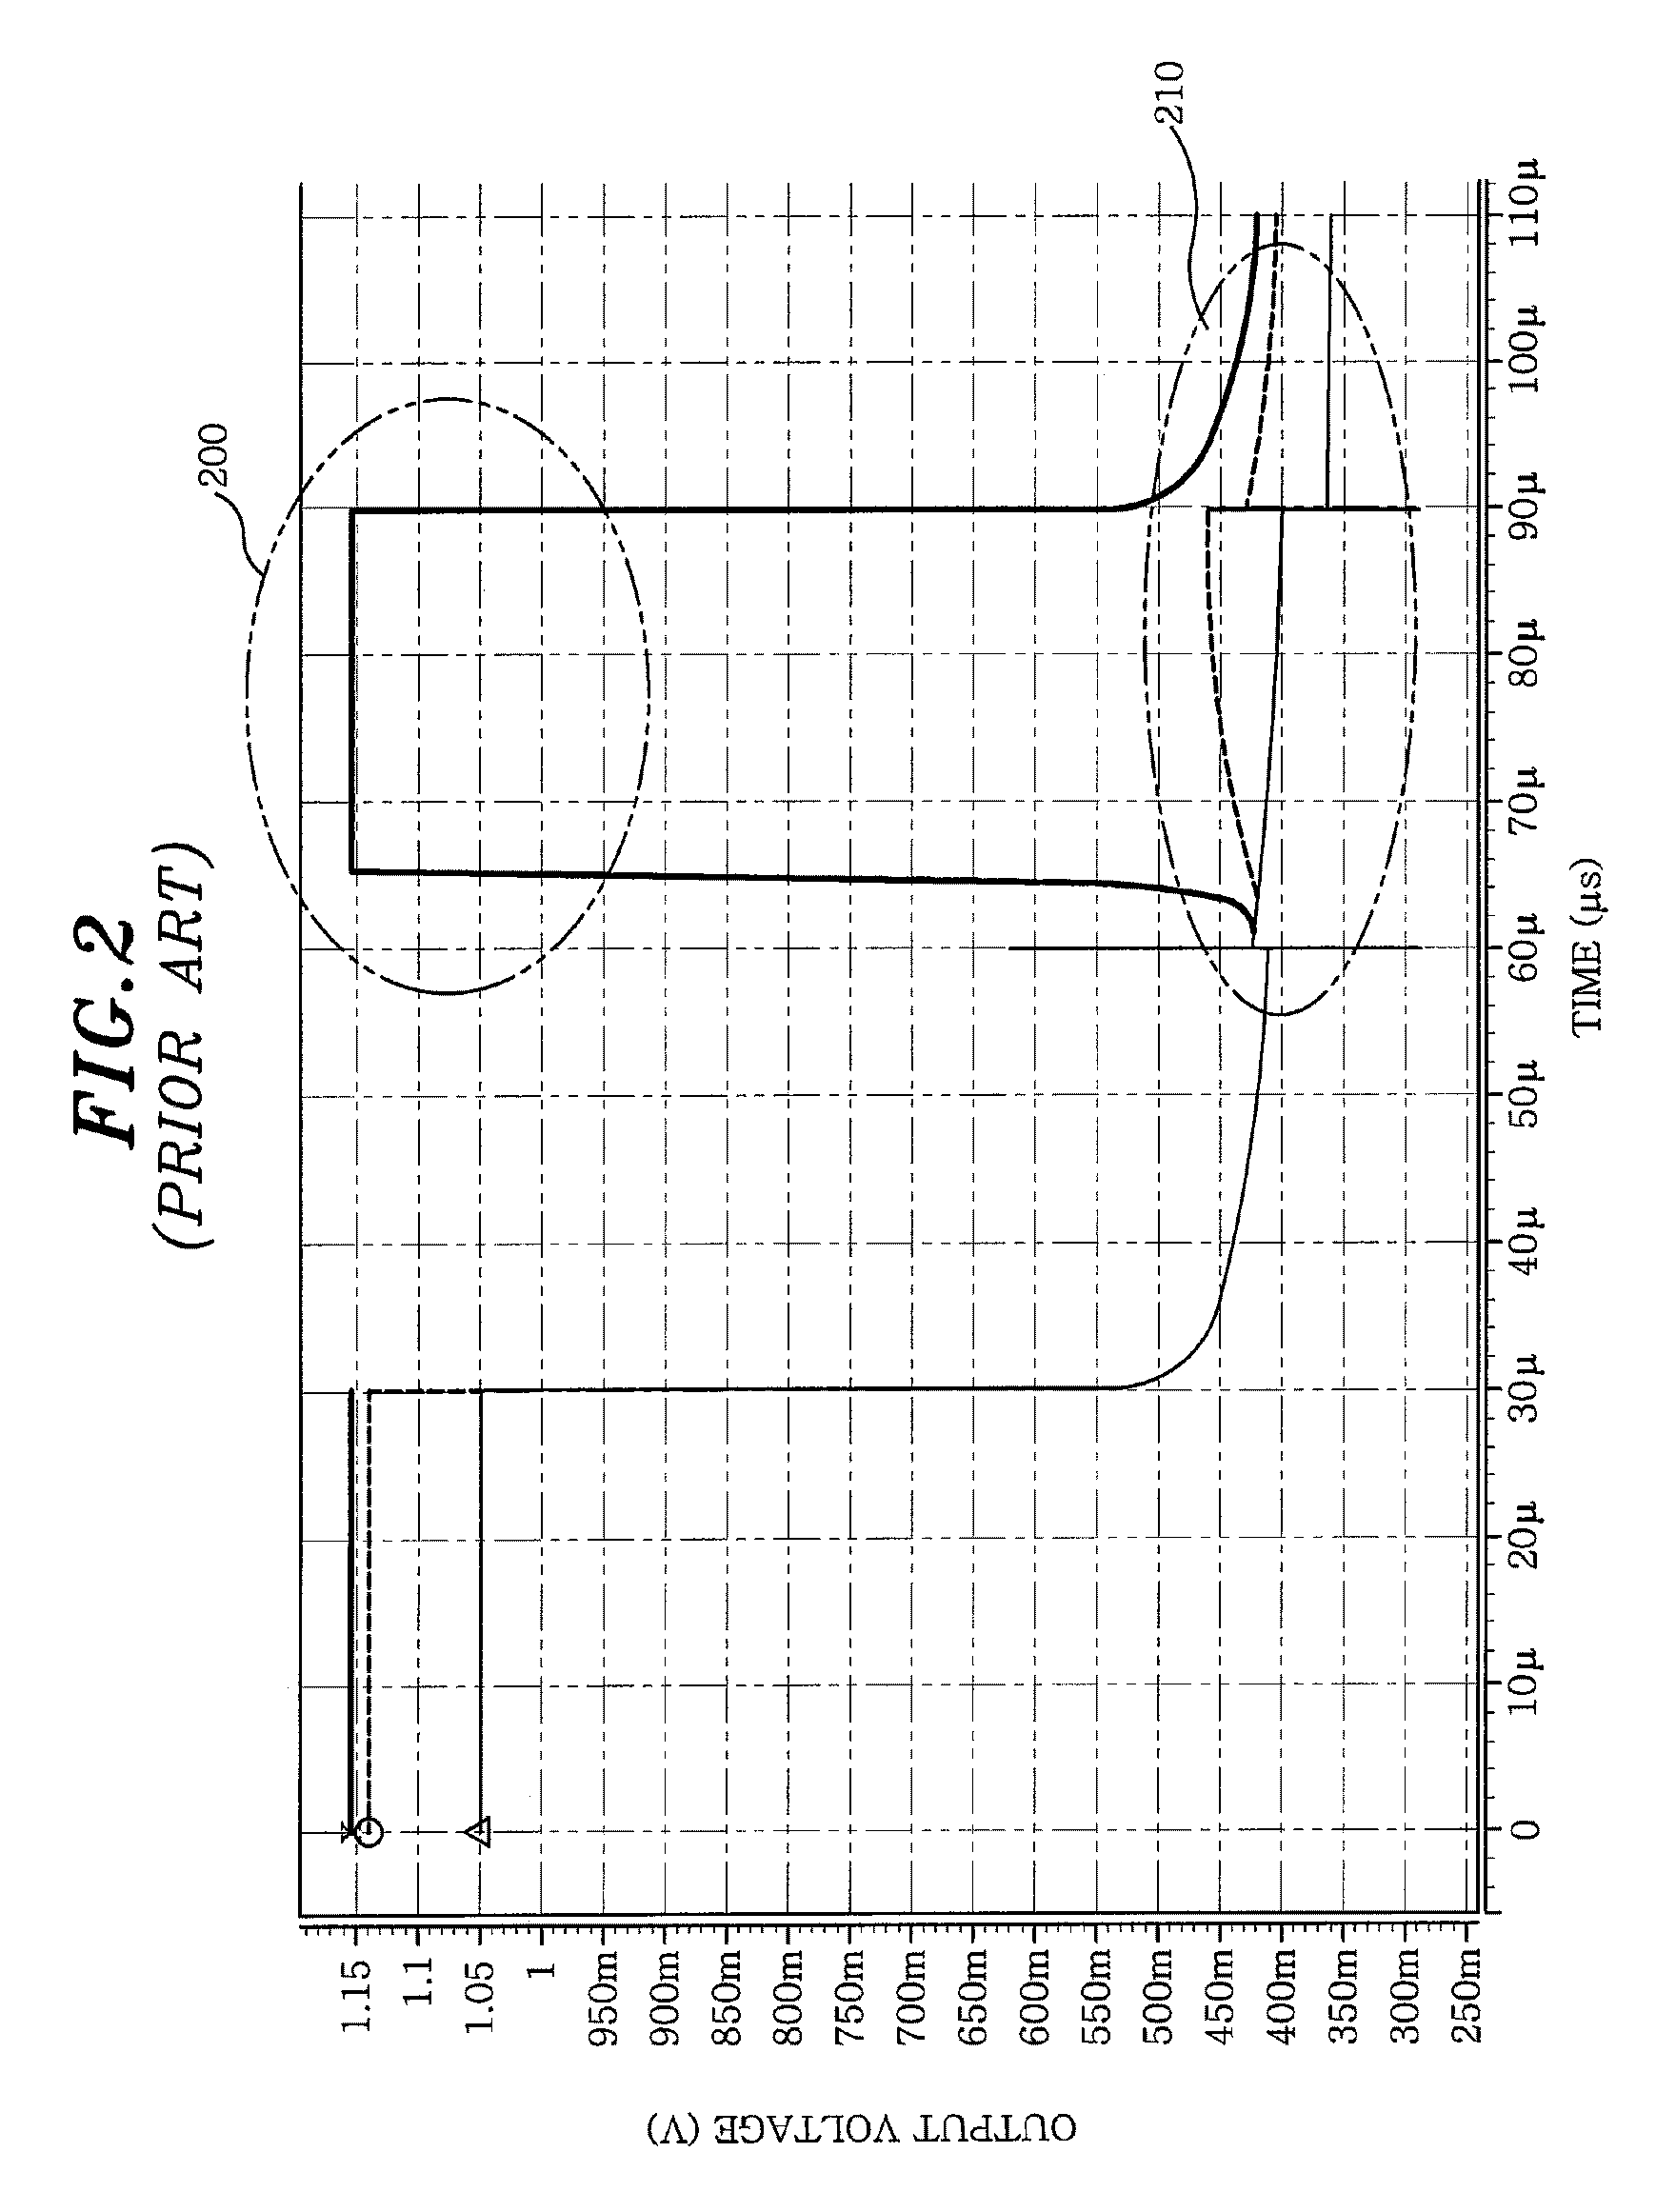 Start-up circuit for generating bandgap reference voltage